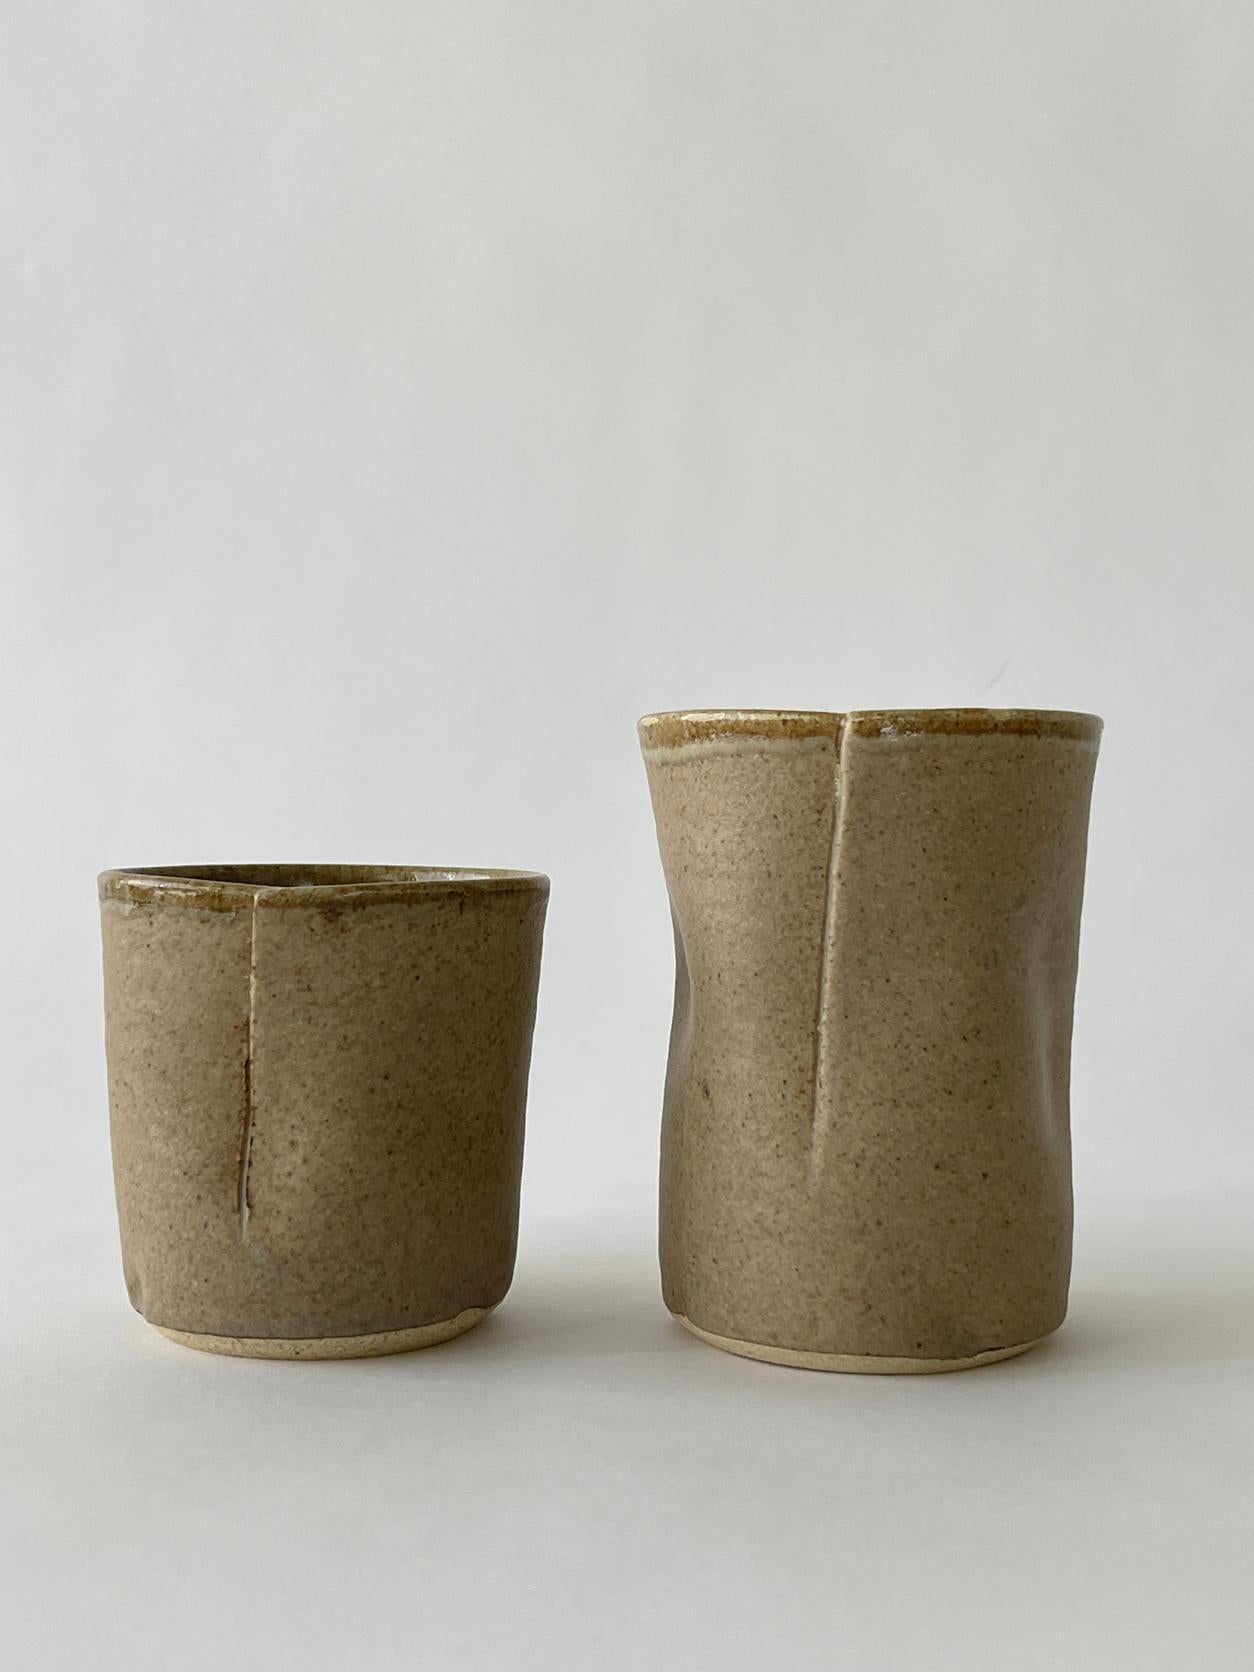 20th century Ceramic handcrafted cup set in a beautiful neutral tan/brown color. Fold over design with a matte exterior finish and a glazed inside. 

Measures: Larger cup: 3.75